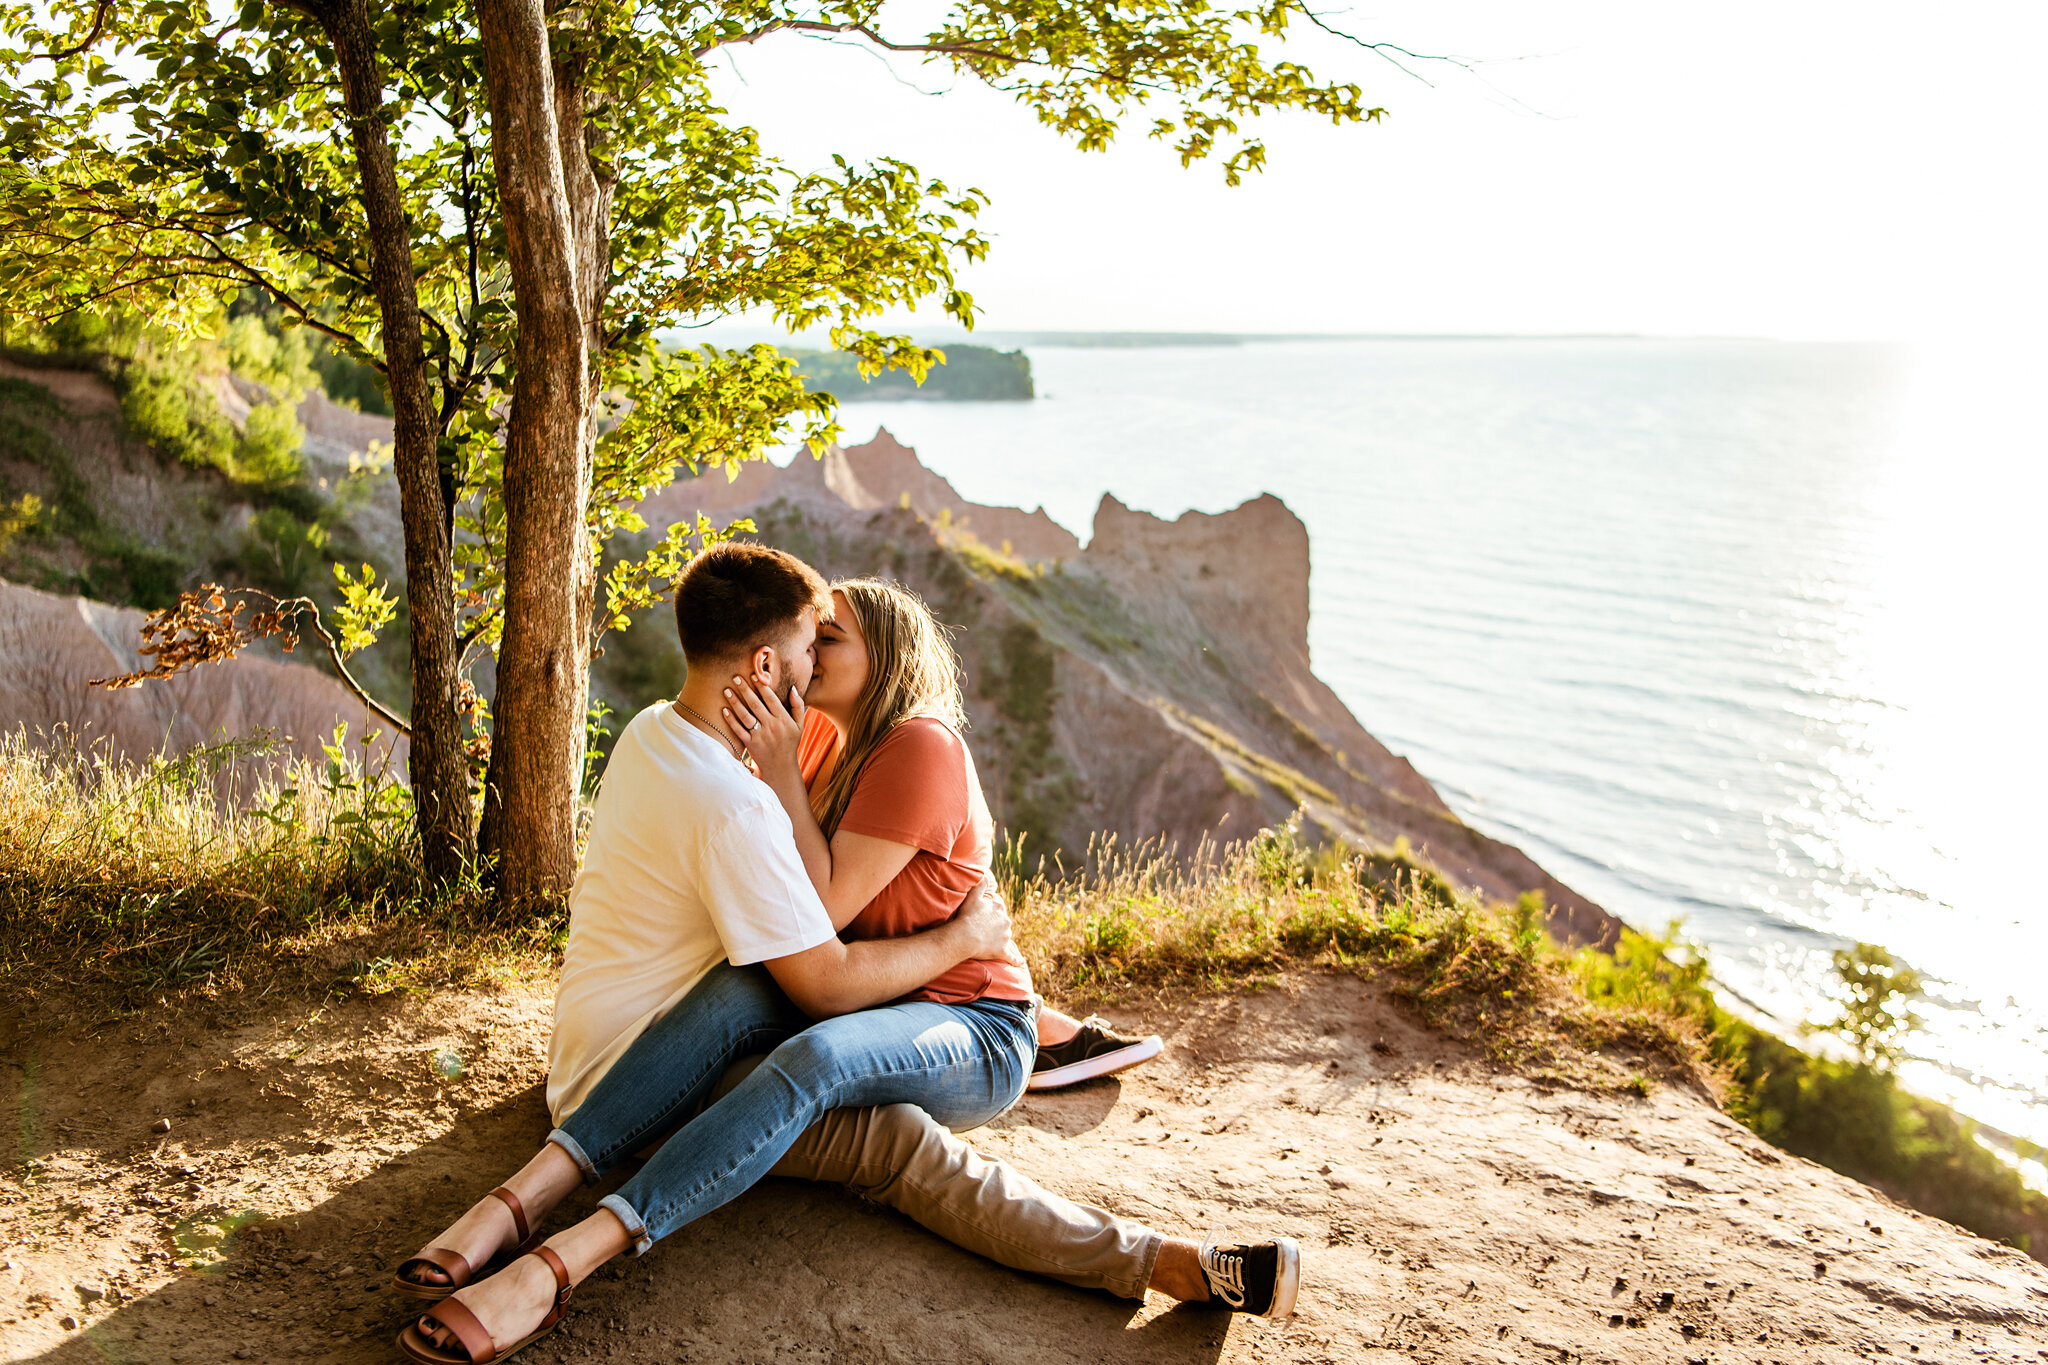 Chimney_Bluffs_State_Park_Rochester_Engagement_Session_JILL_STUDIO_Rochester_NY_Photographer_6831.jpg